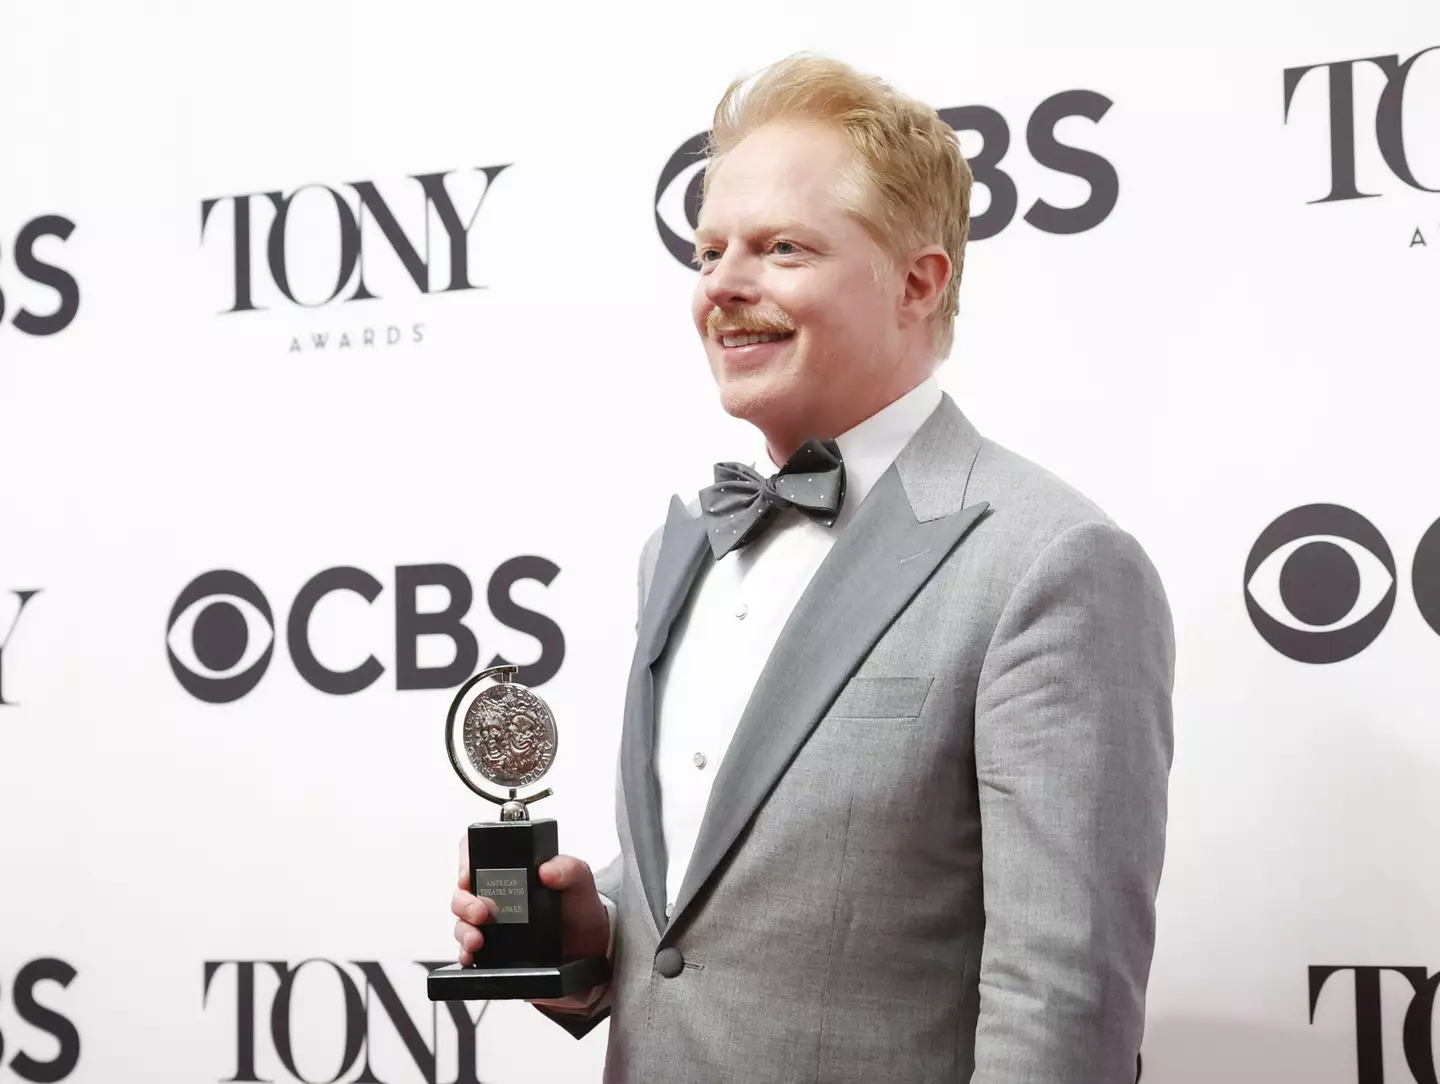 Jesse Tyler Ferguson spoke about the script of a Modern Family spin-off while at the Tony Awards.